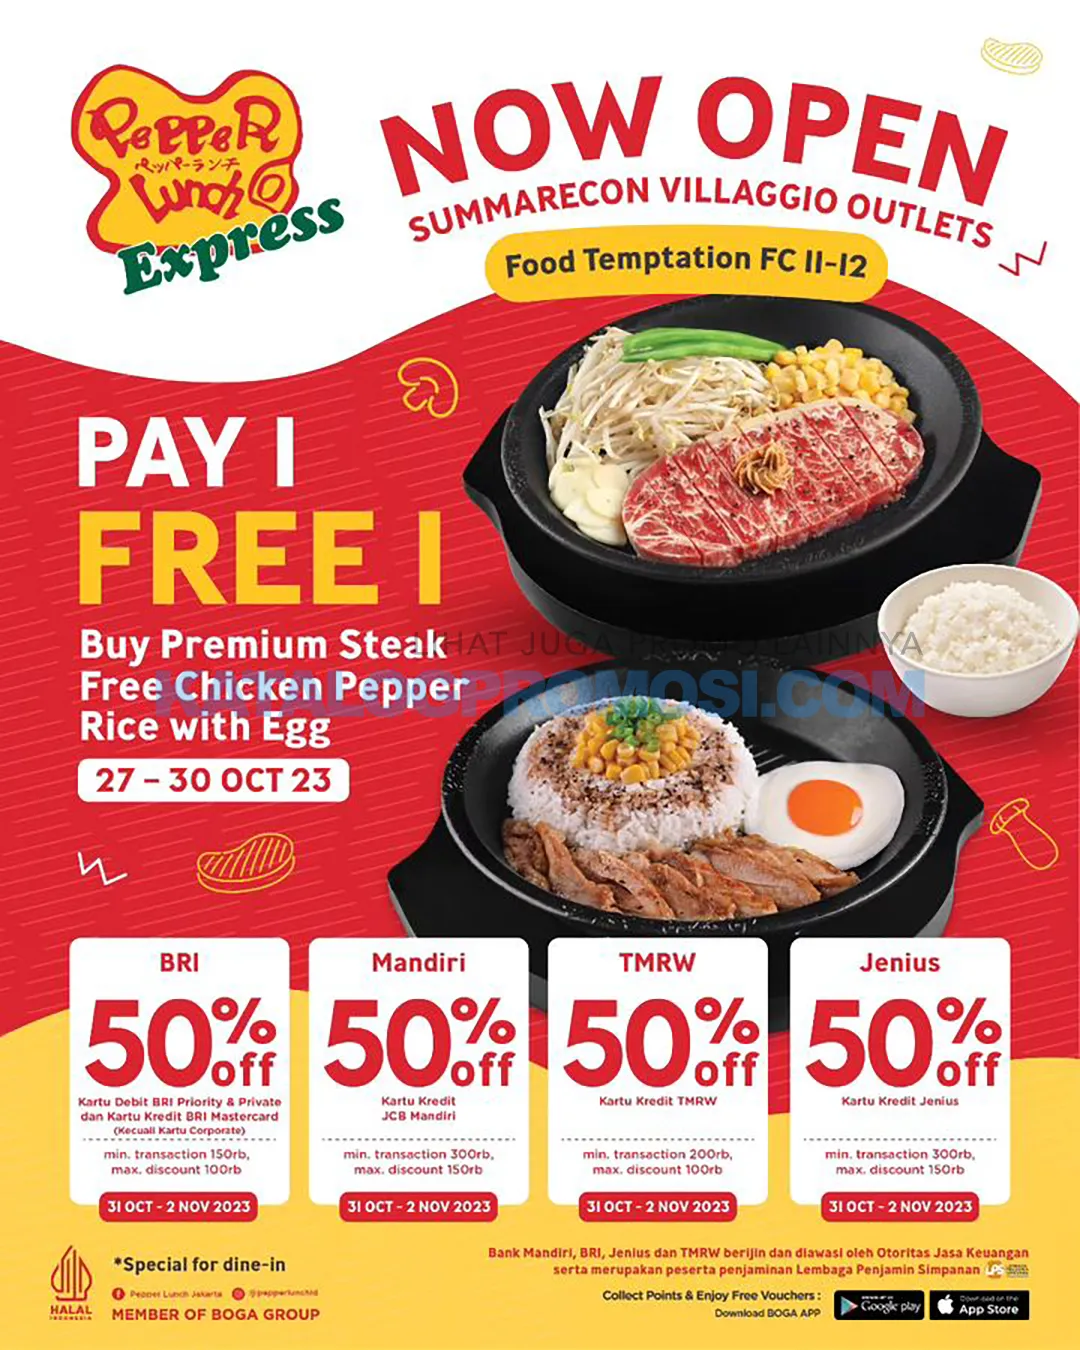 Pepper Lunch SUMMARECON VILLAGIO Outlets Opening Promo - PAY 1 FREE 1